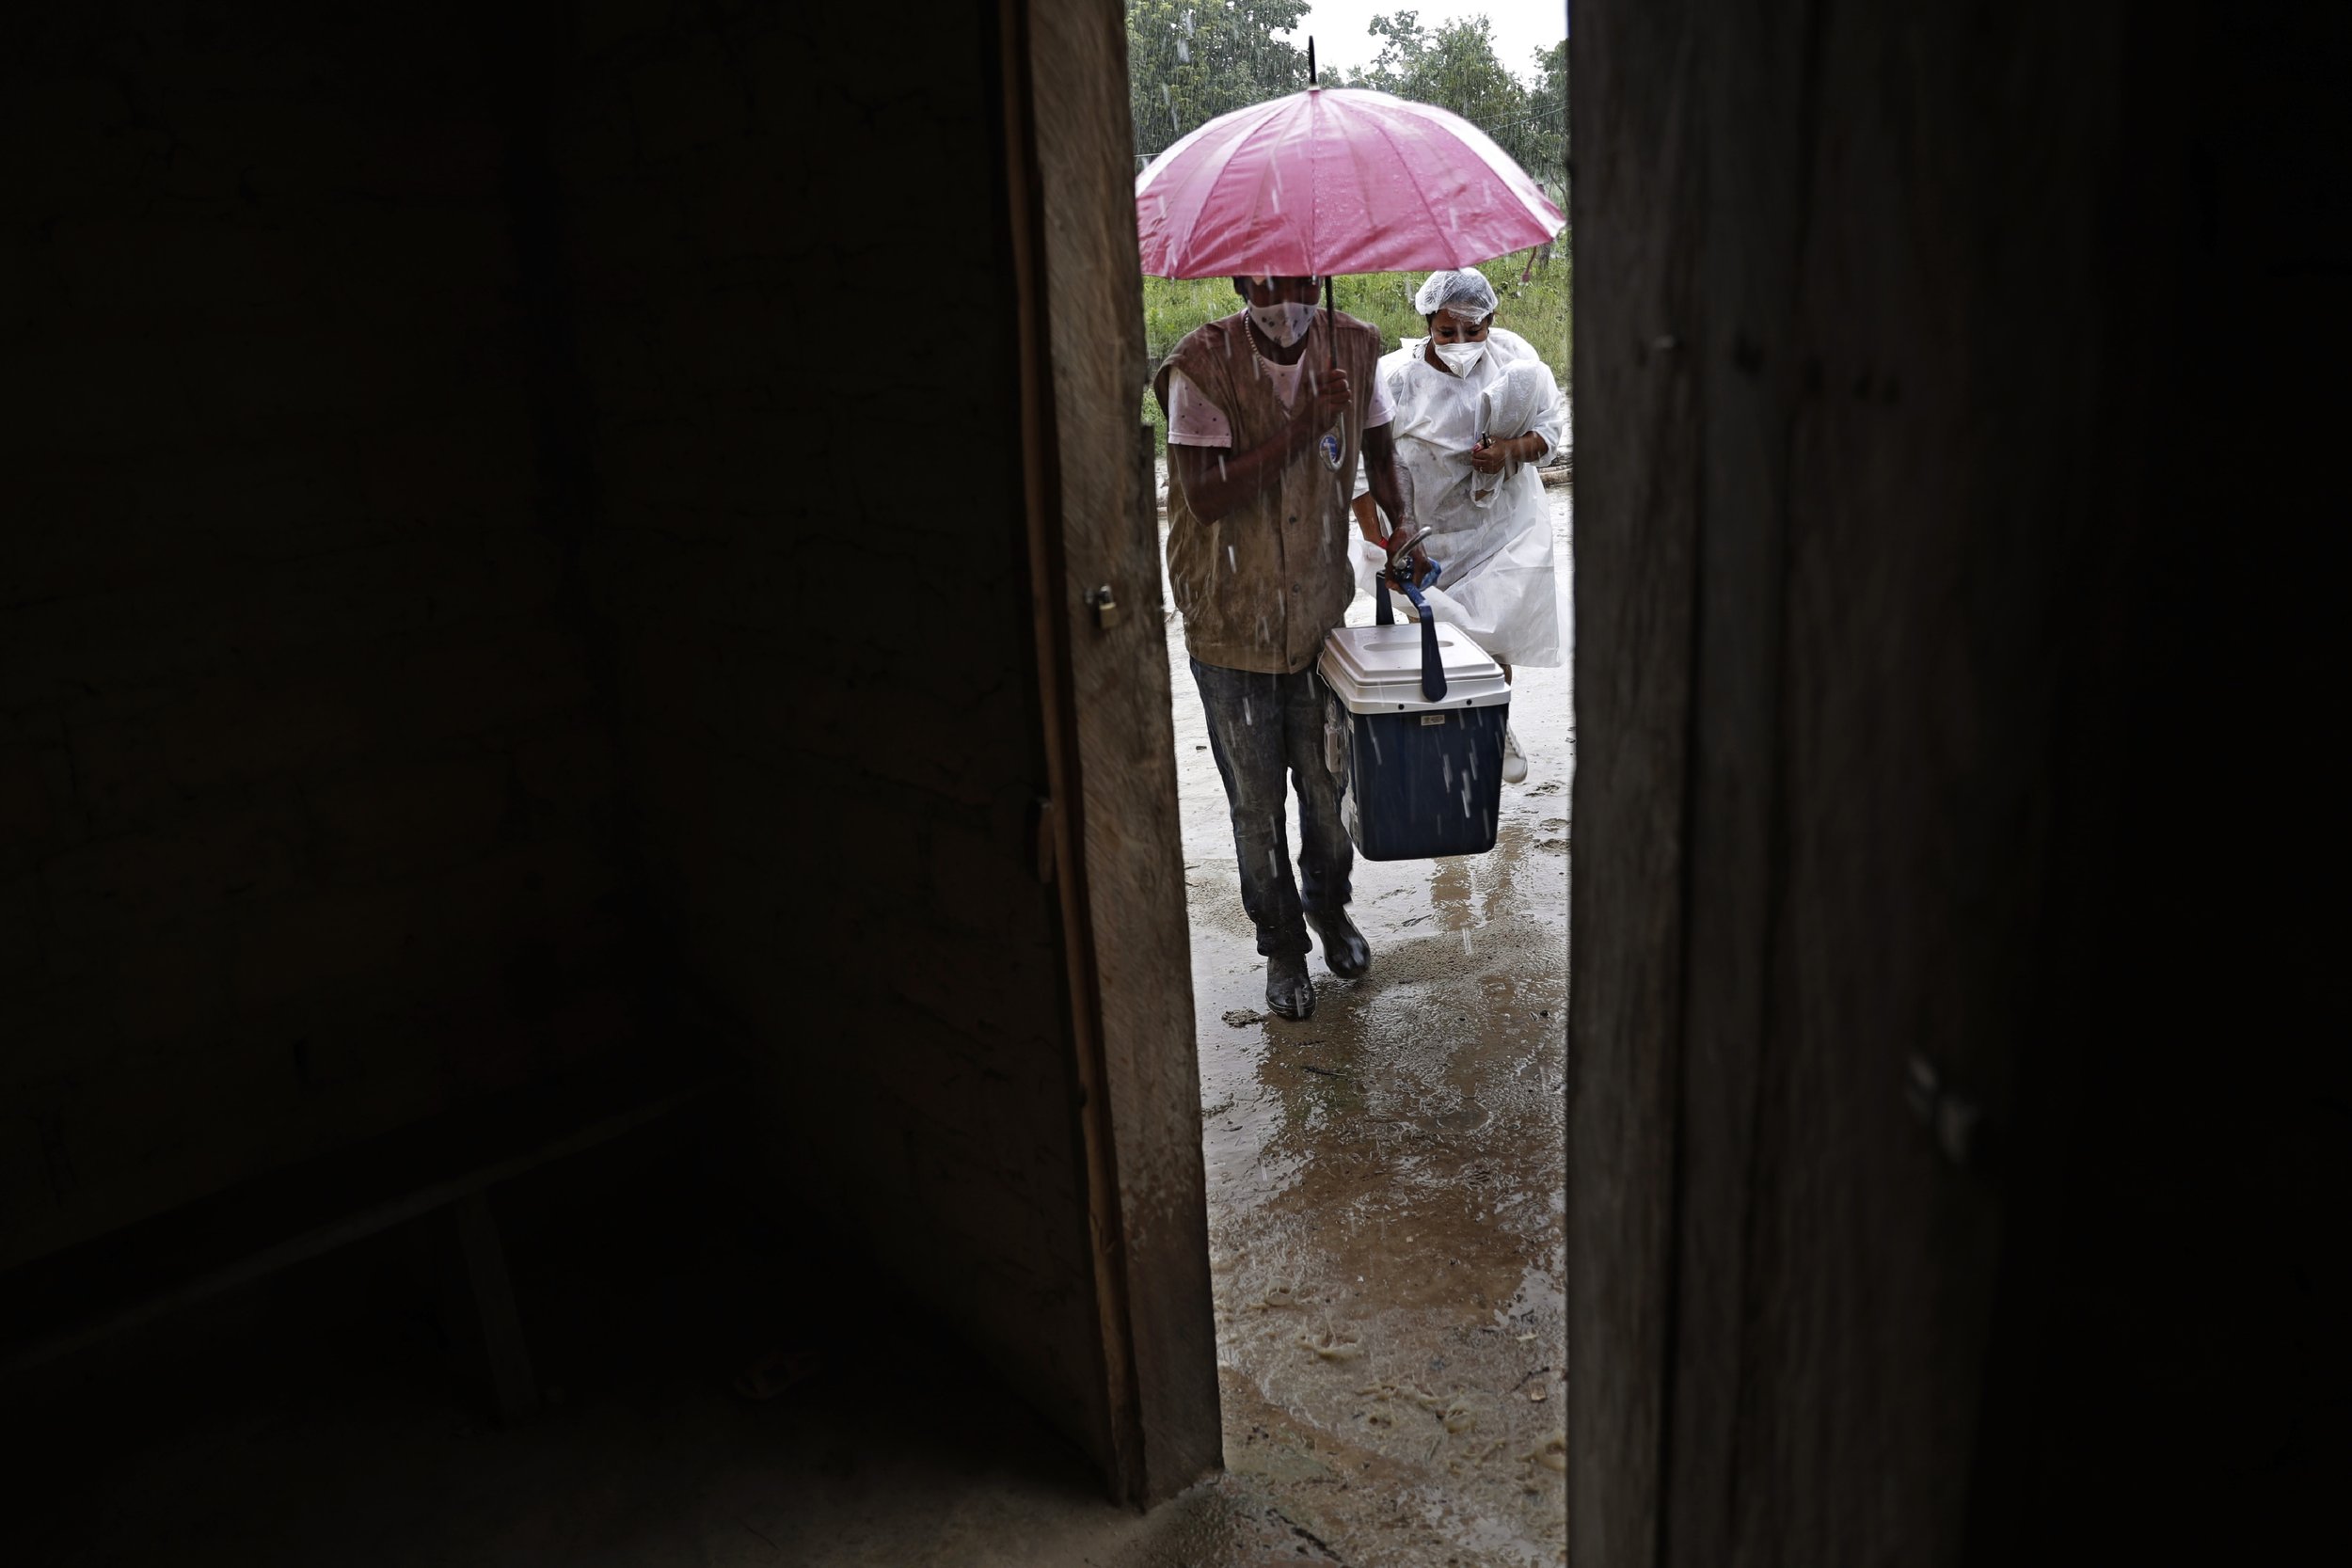  Health workers arrive with a cooler containing doses of the Sinovac vaccine at a home in the Kalunga Vao de Almas community, a rural area on the outskirts of Cavalcante, Goias state, Brazil, on March 15, 2021. Kalunga Vao de Almas is a traditional c